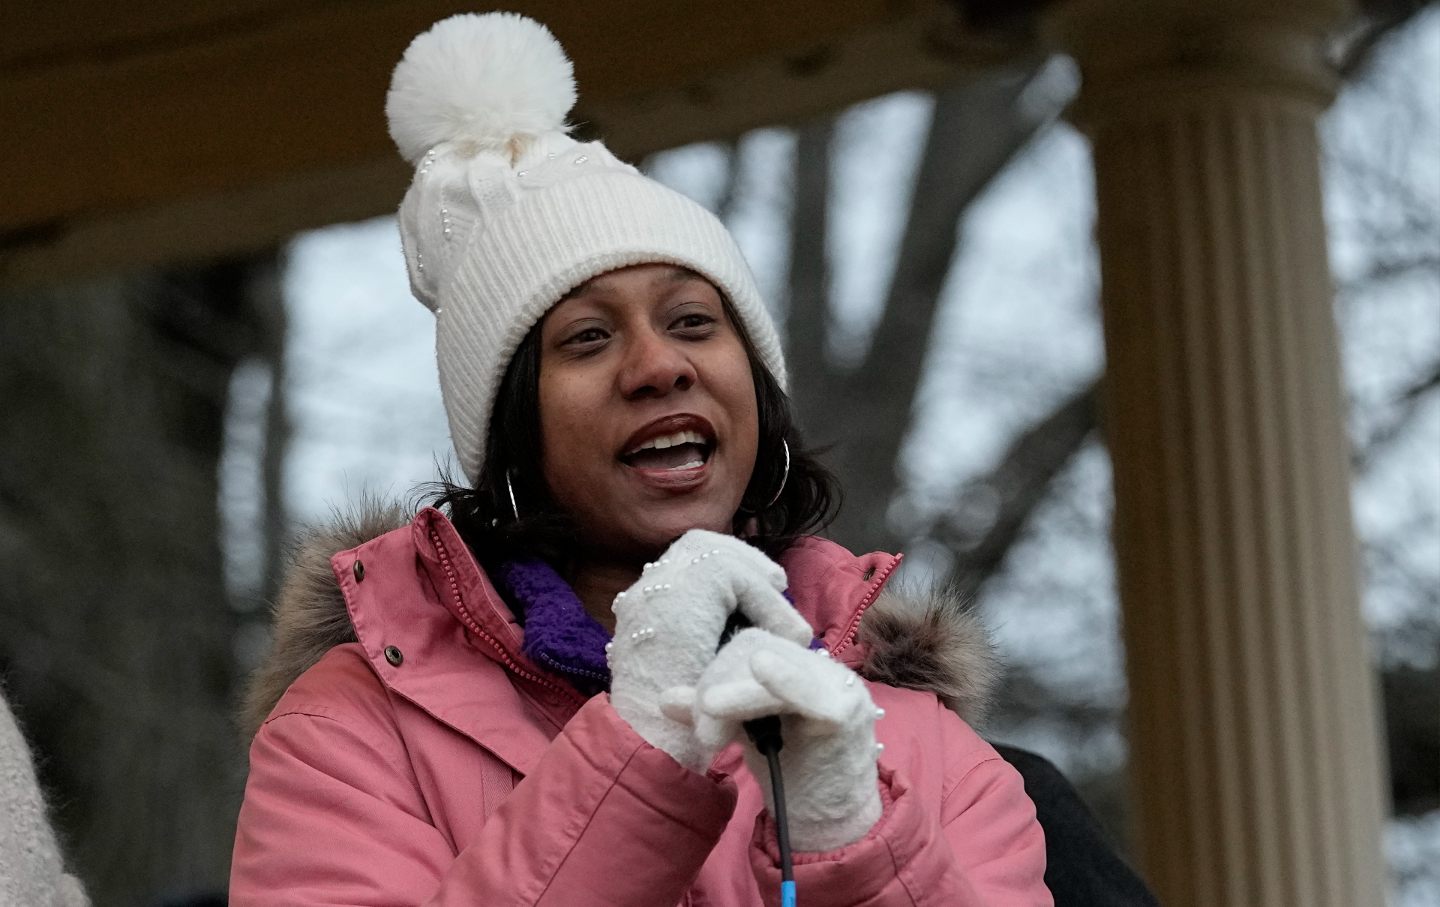 Brittany Watts, dressed in a warm pink coat and white gloves and a hat, speaking outside at a microphone.